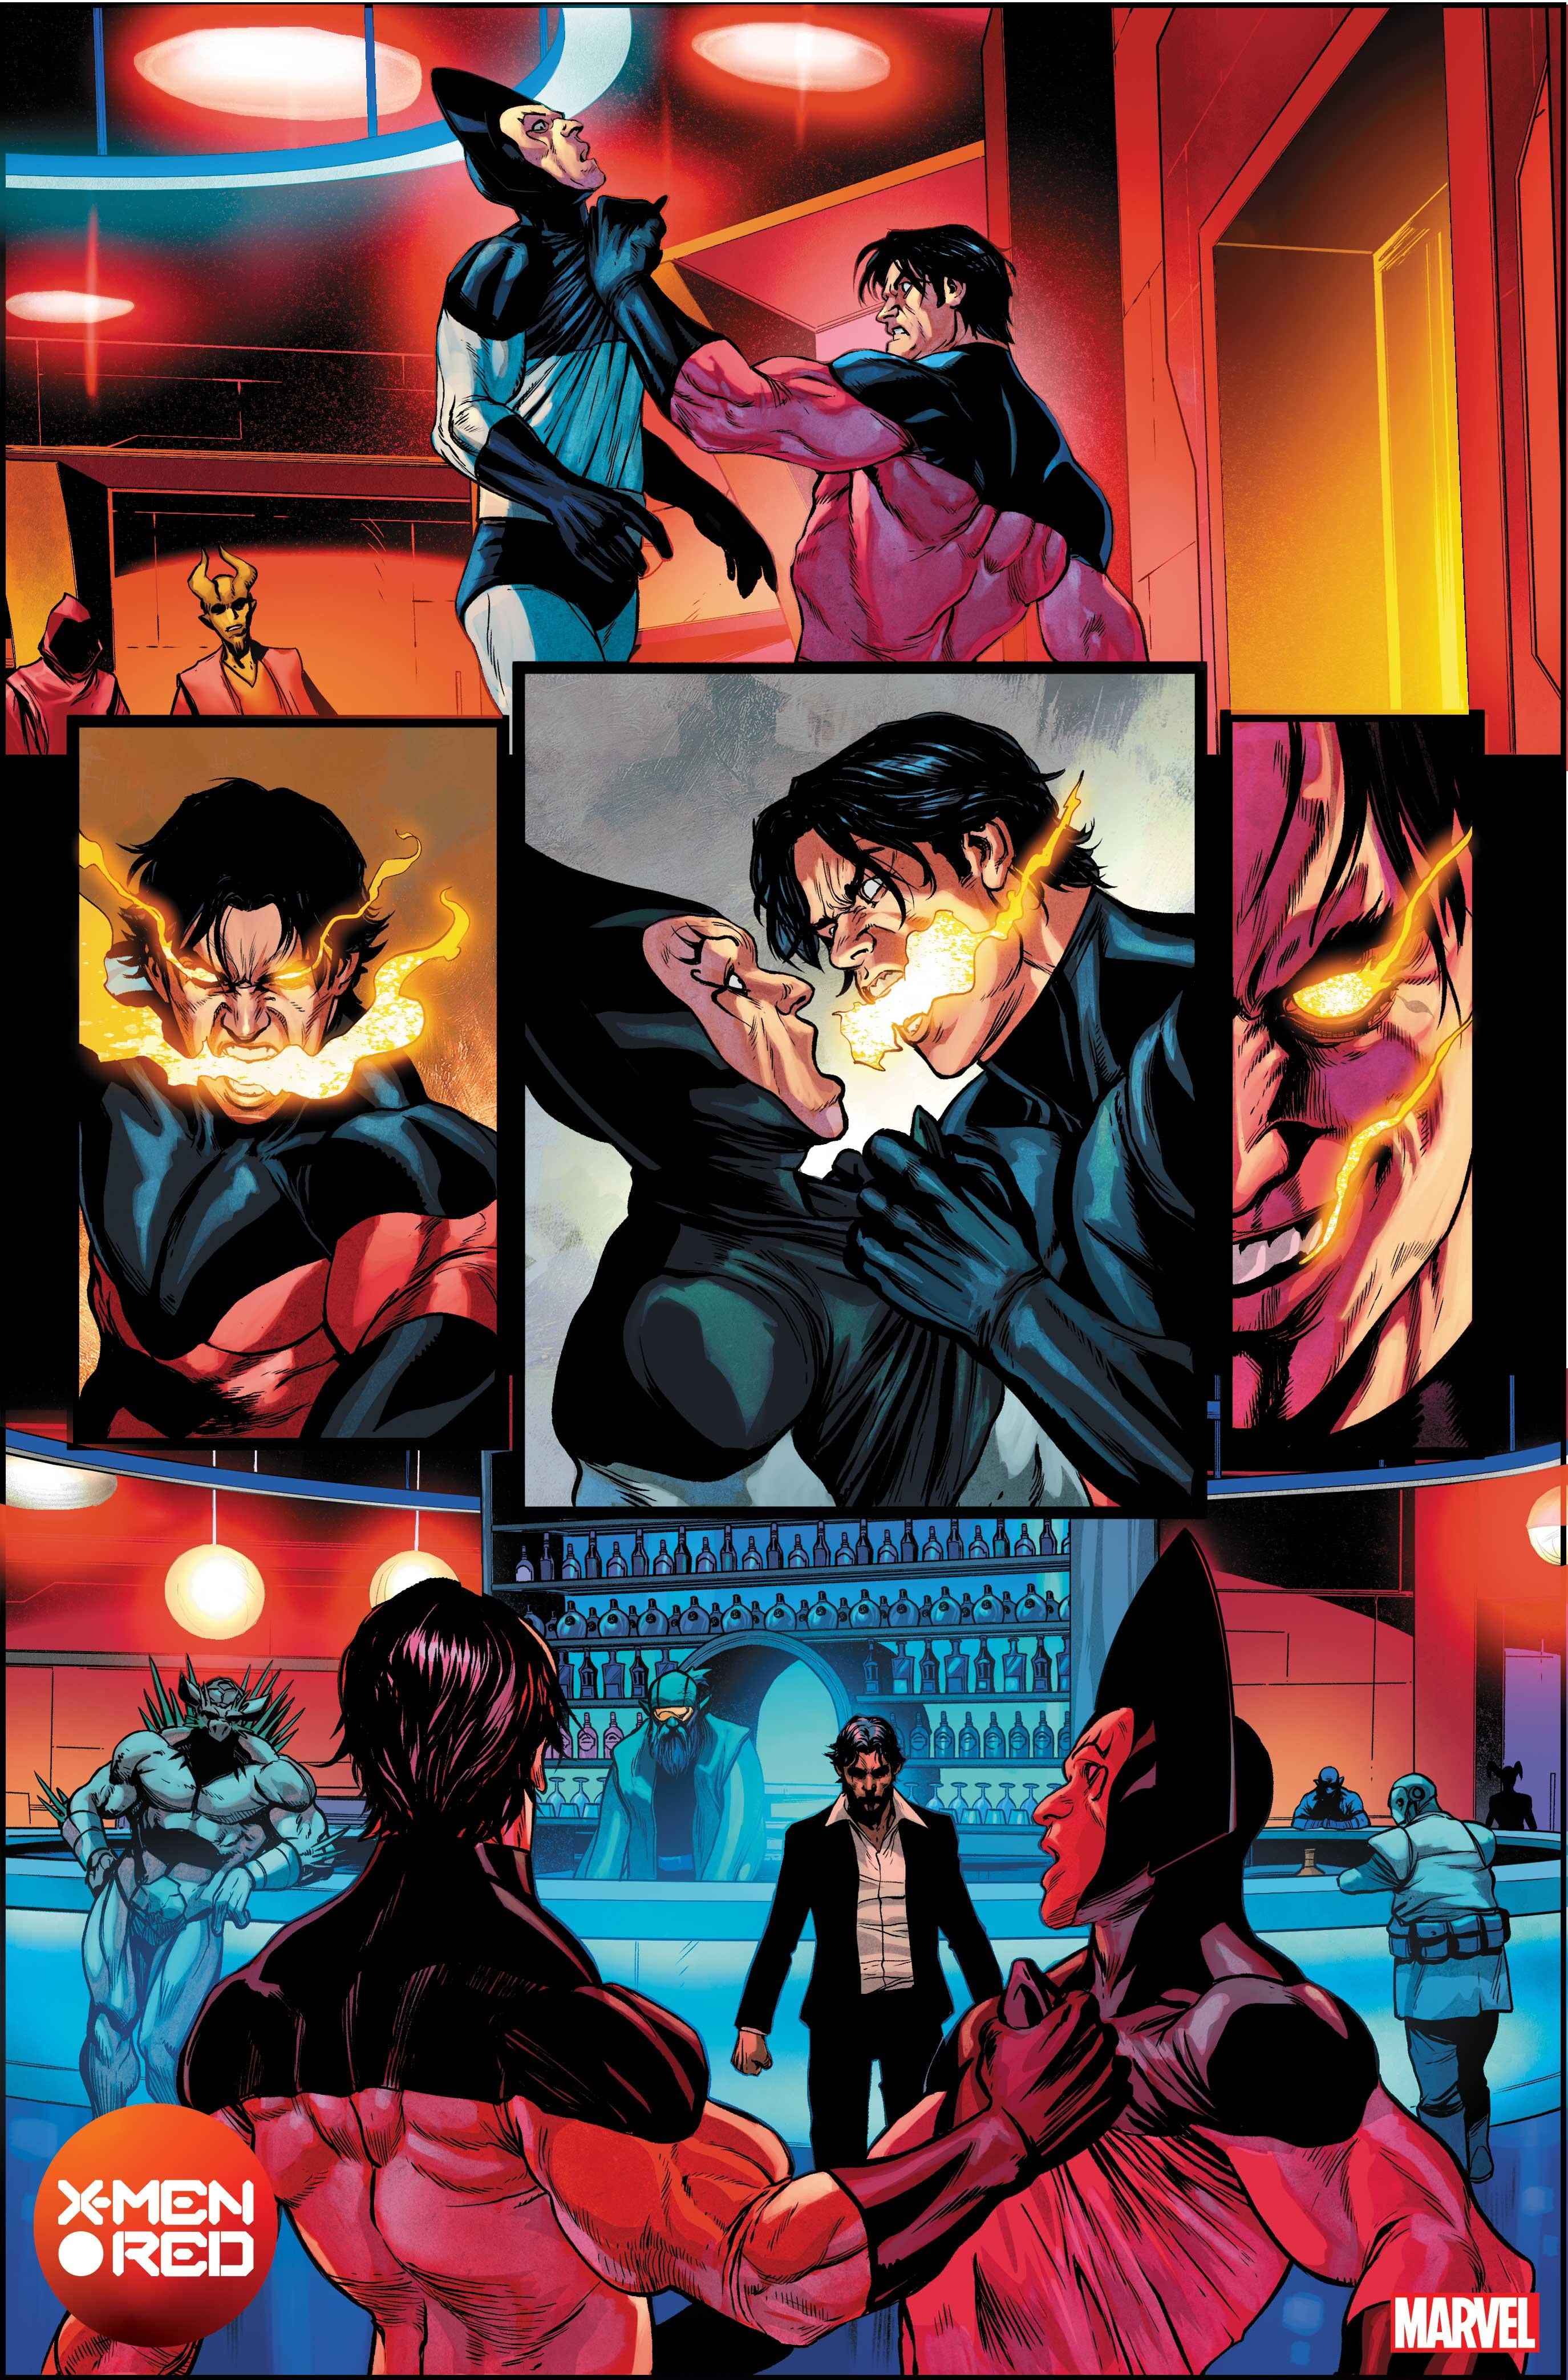 X-Men Red: Al Ewing Teases Seismic Events in the New Marvel Destiny of